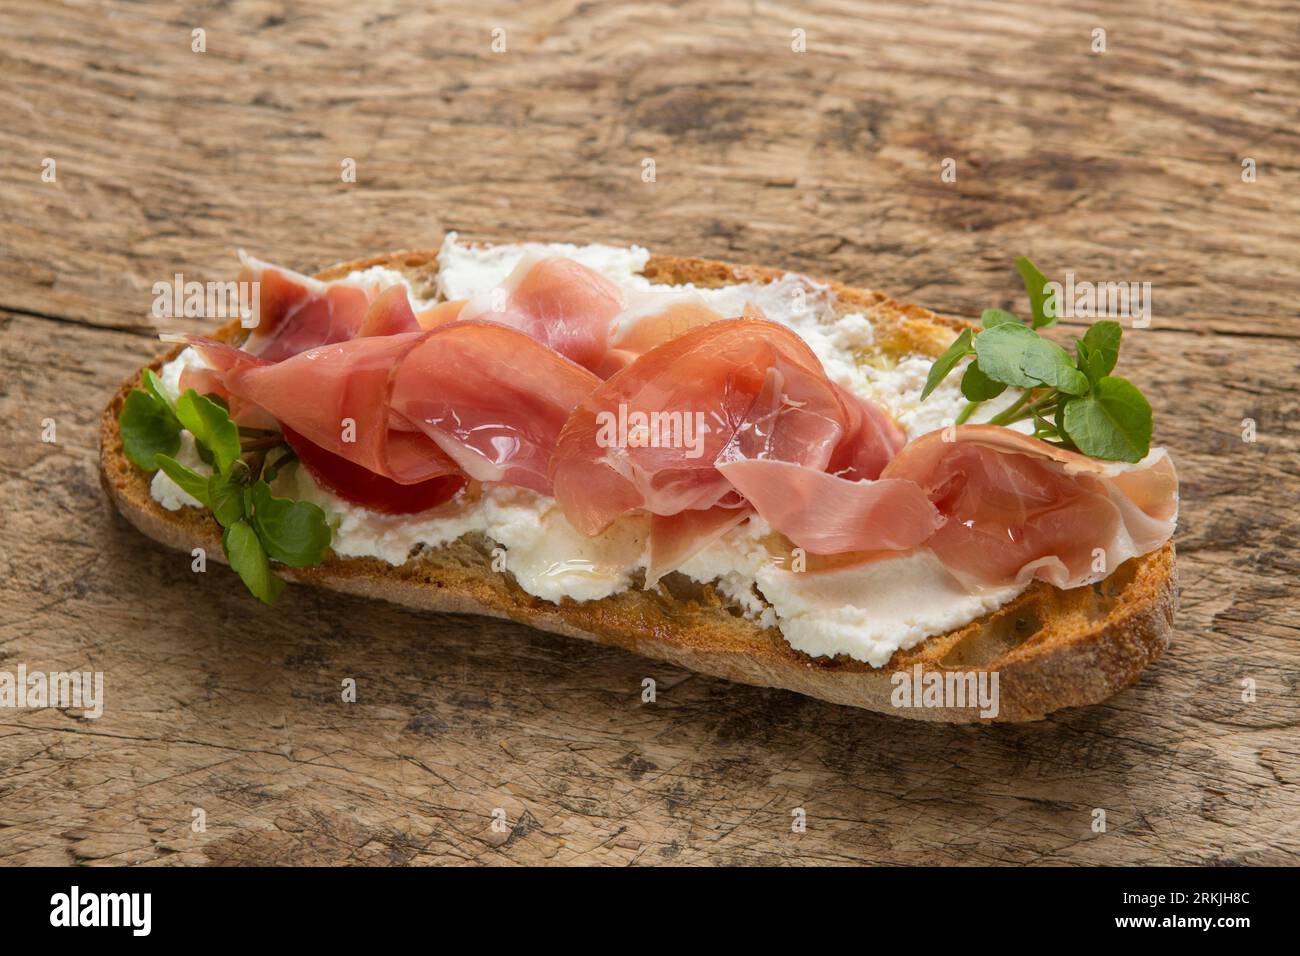 An example of bruschetta made with toasted sourdough bread, ricotta cheese and Serrano ham. Drizzled with olive oil and garnished with watercress. Pre Stock Photo